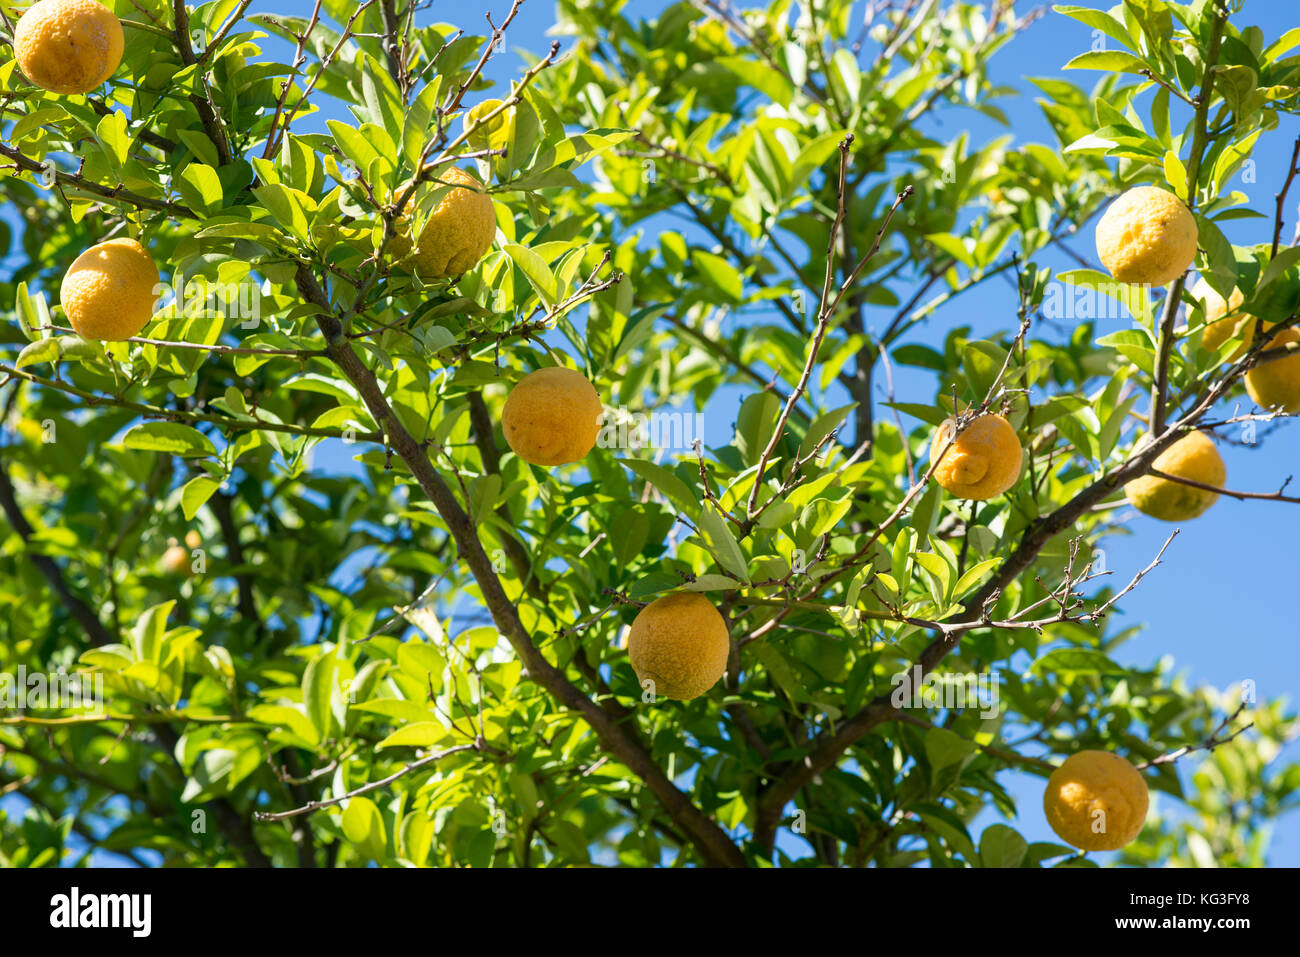 Lemon tree and fruit. Lemons grow well in Australia and are often garden ornamental trees used for convenient culinary supplies and to provide shade. Stock Photo